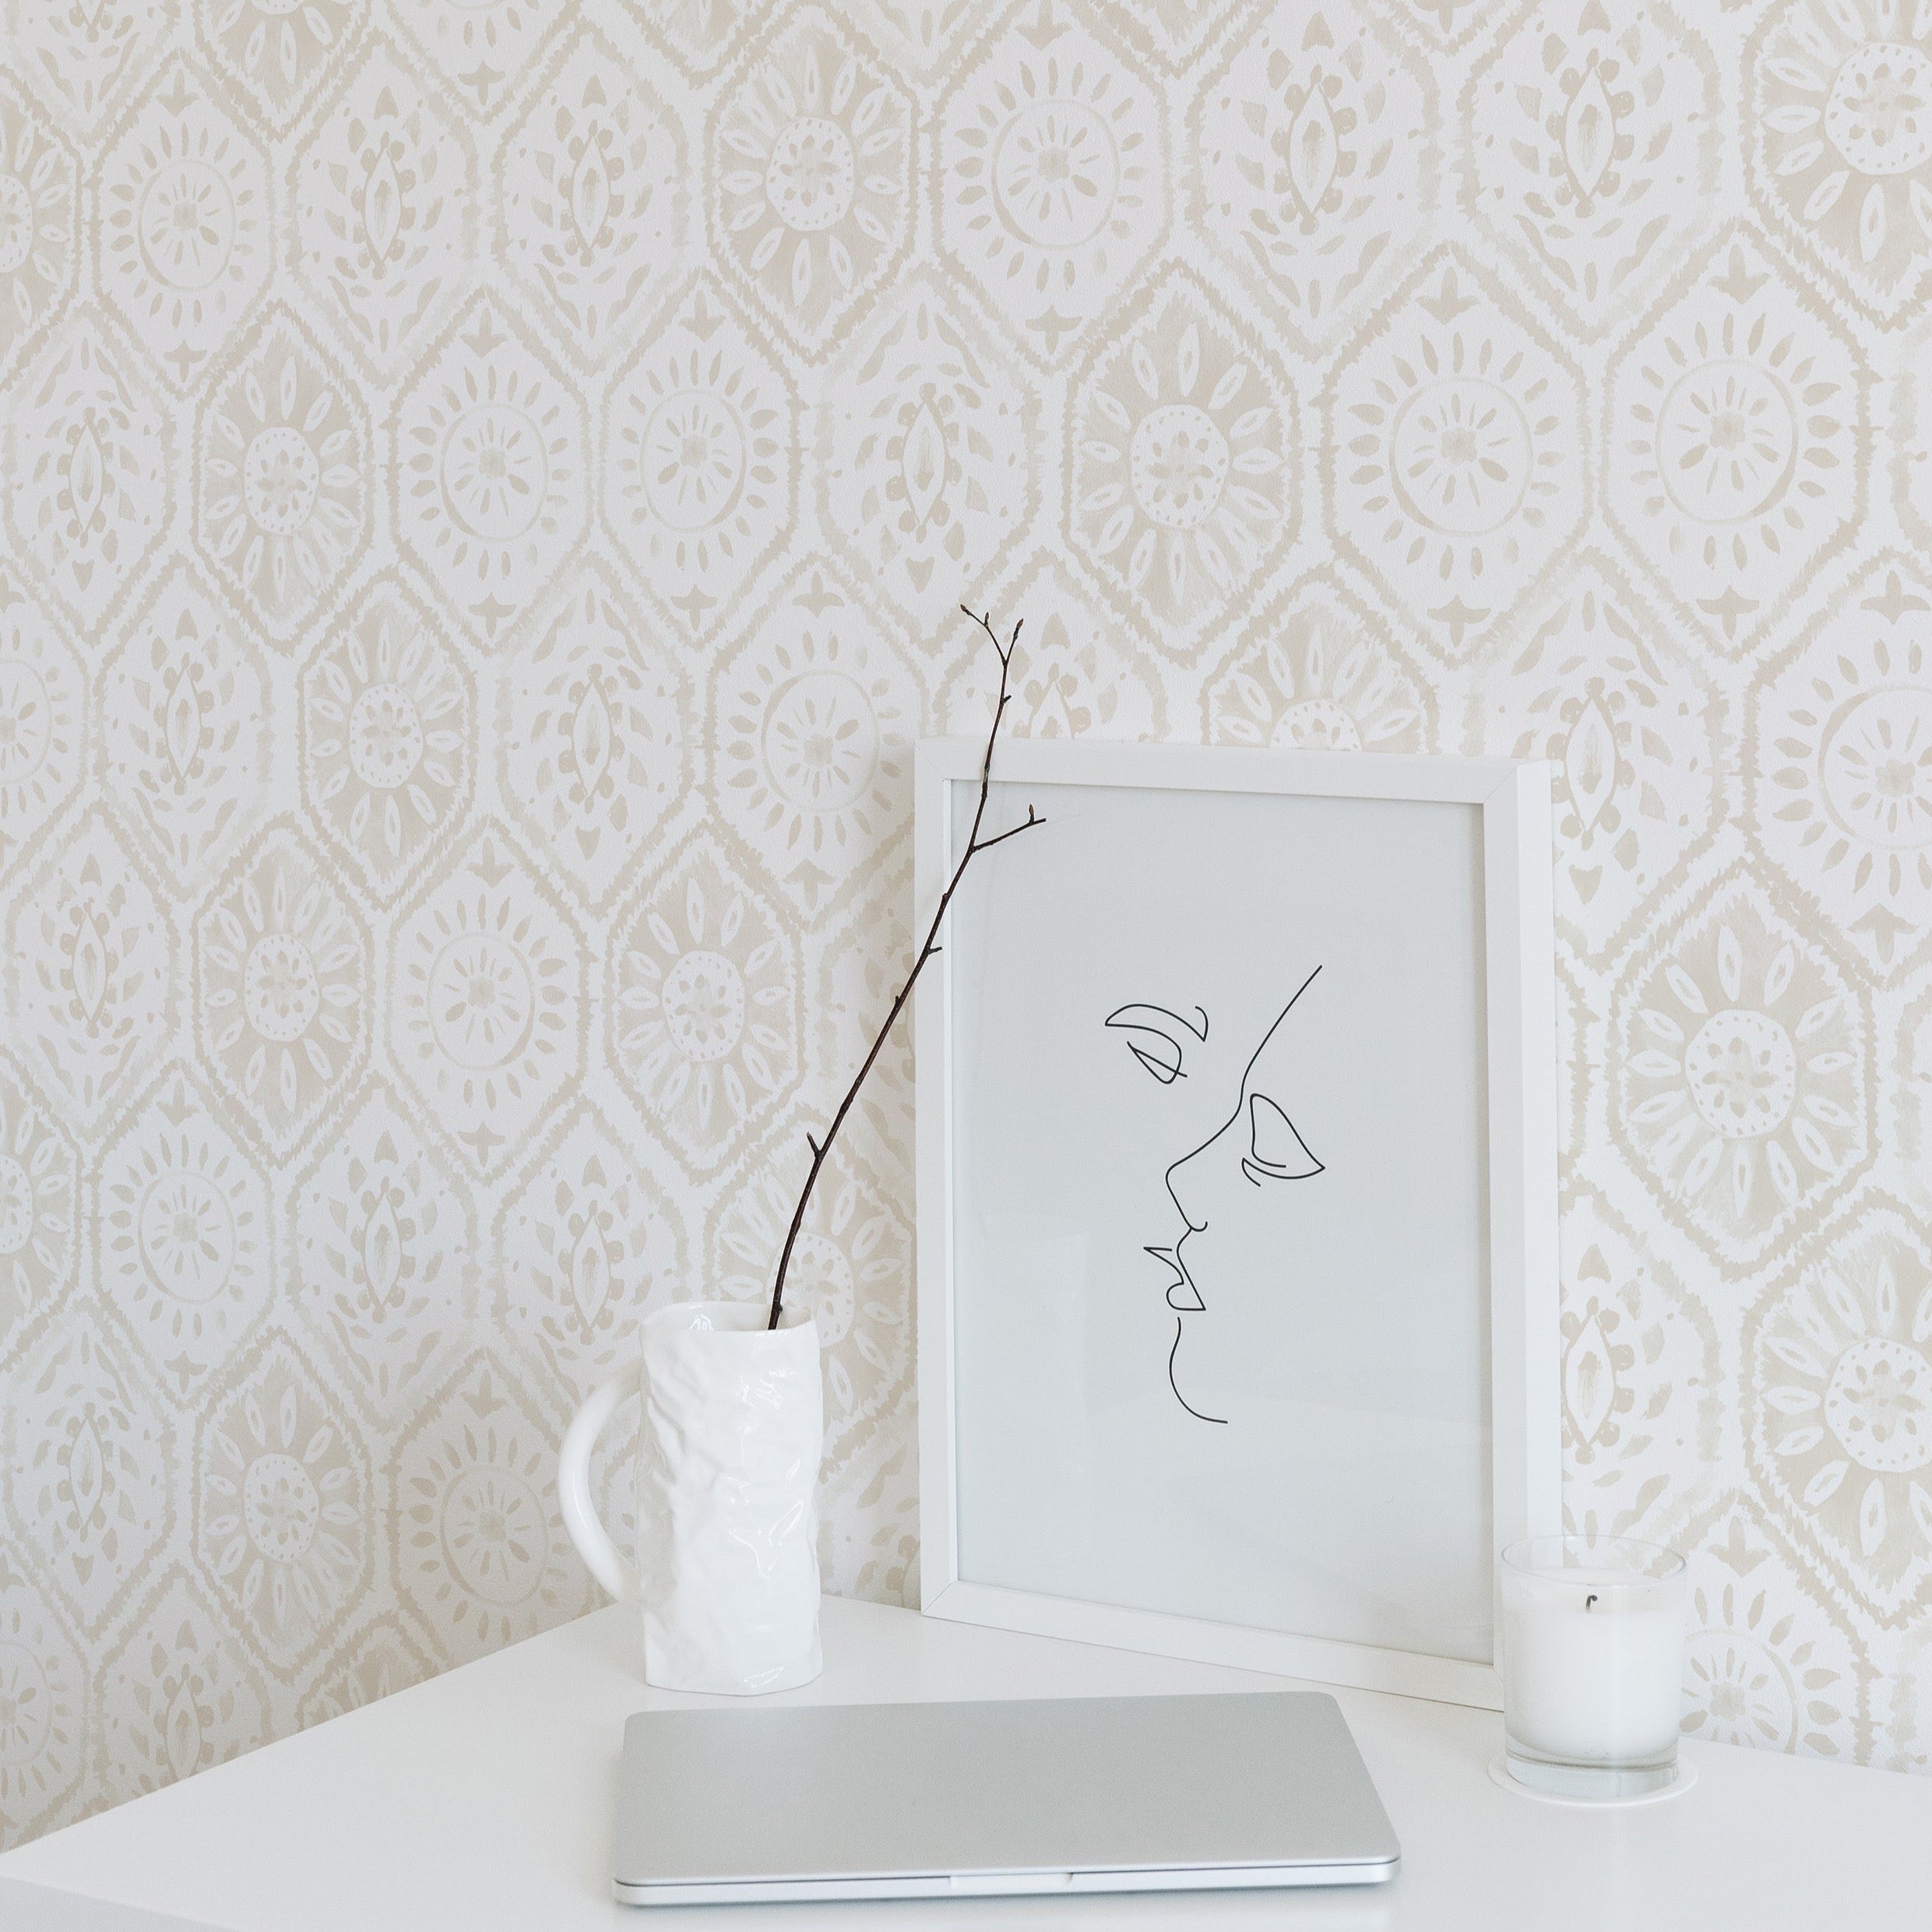 A minimalist workspace highlighted by the Moroccan Tile Wallpaper in Ecru. The wallpaper's intricate pattern provides a soft, decorative background that pairs well with the simple desk, modern line art in a frame, a white laptop, and a single branch in a vase, creating a serene and stylish area.